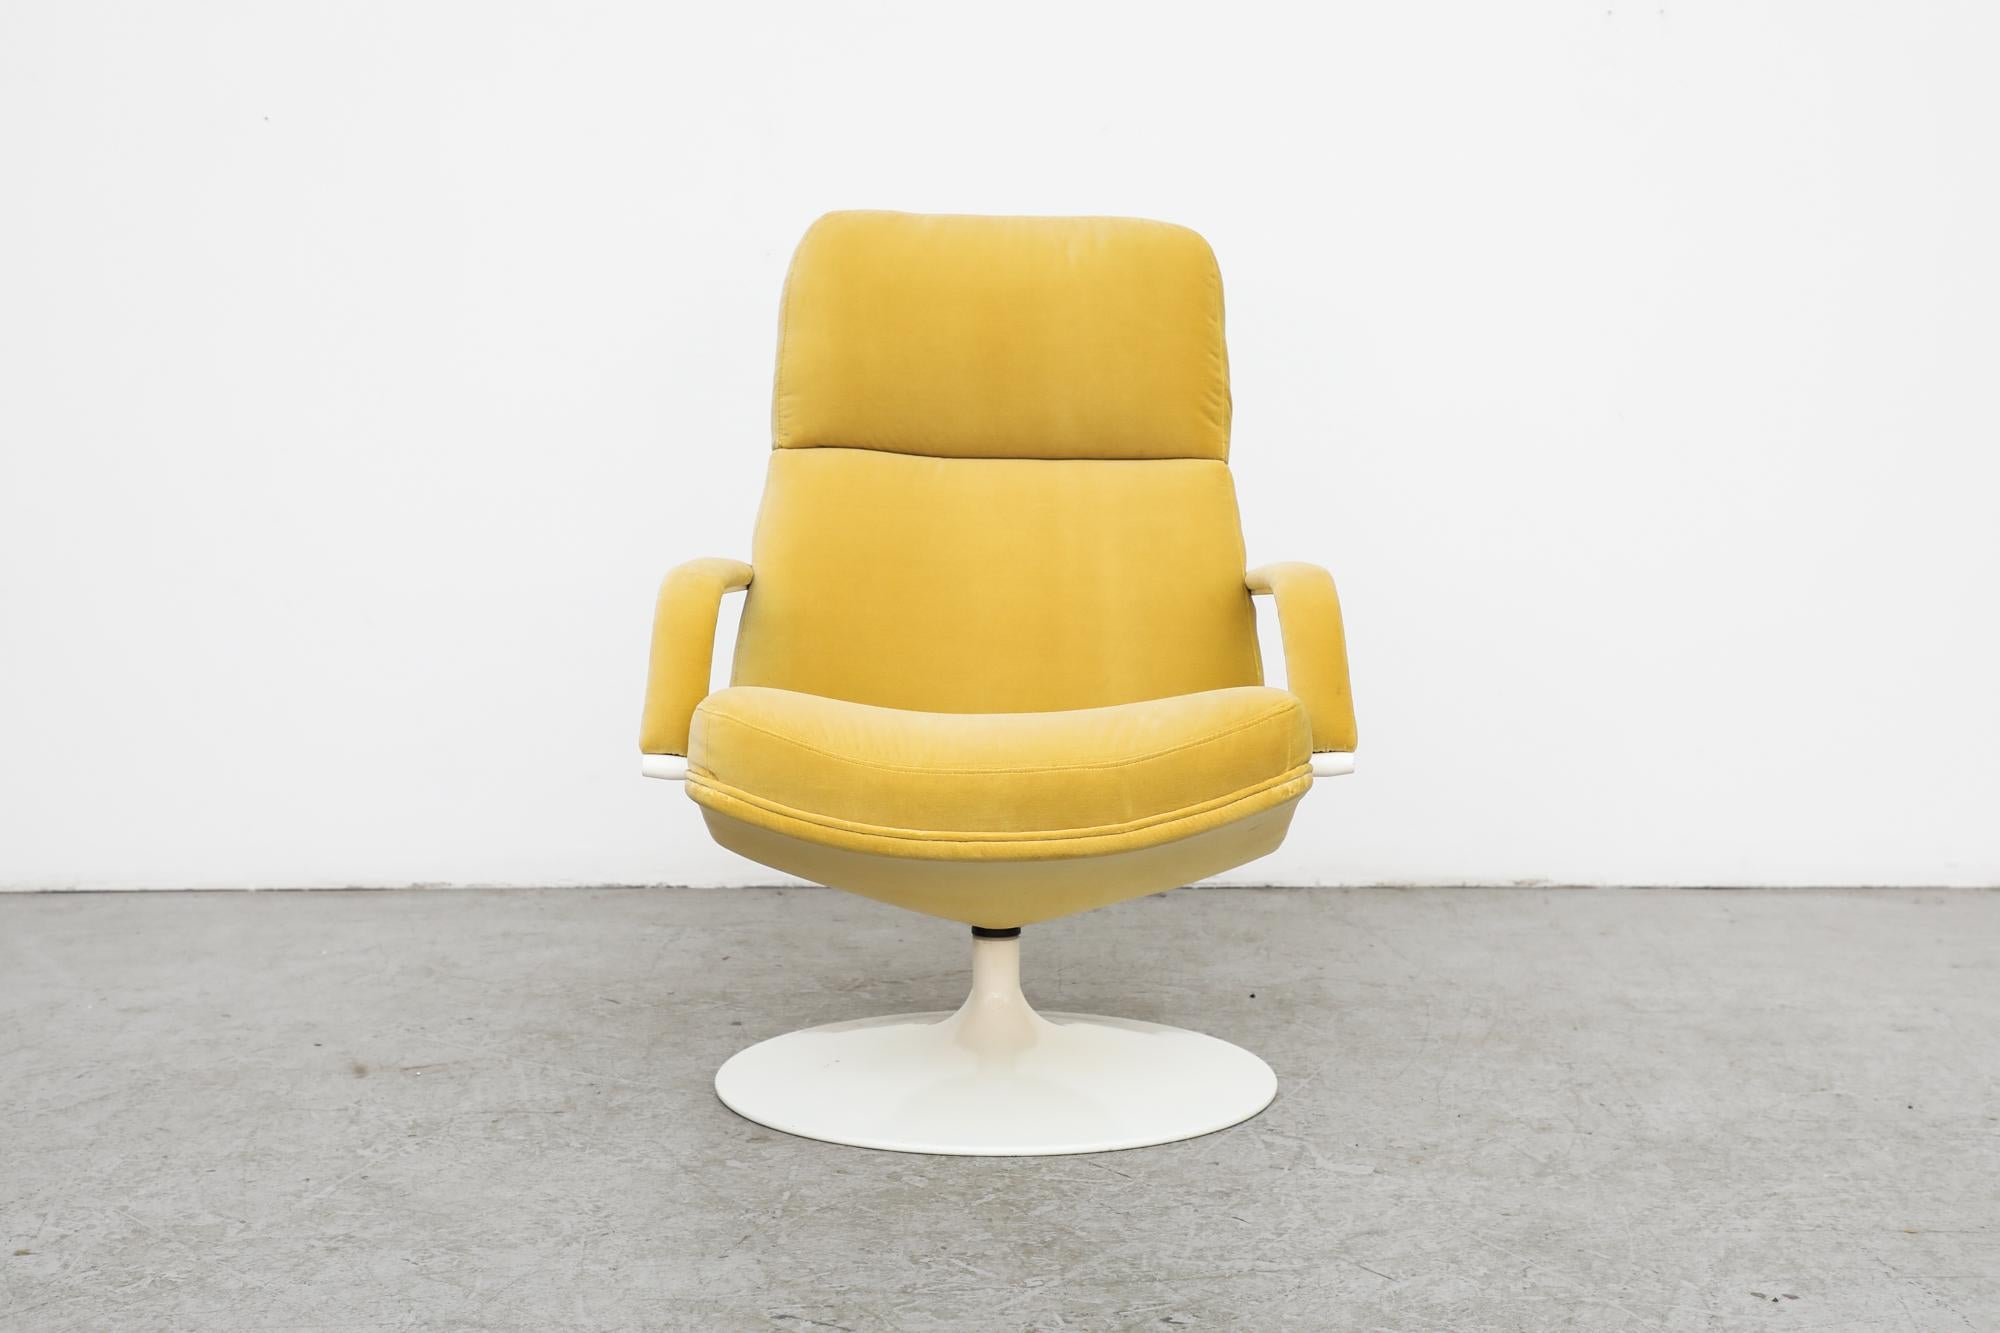 Handsome Artifort swivel lounge chair with white Saarinen style tulip base and new yellow velvet upholstery, designed by British designer Geoffrey Harcourt for acclaimed Dutch furniture house Artifort in 1972. Born in 1935, Geoffrey D. Harcourt